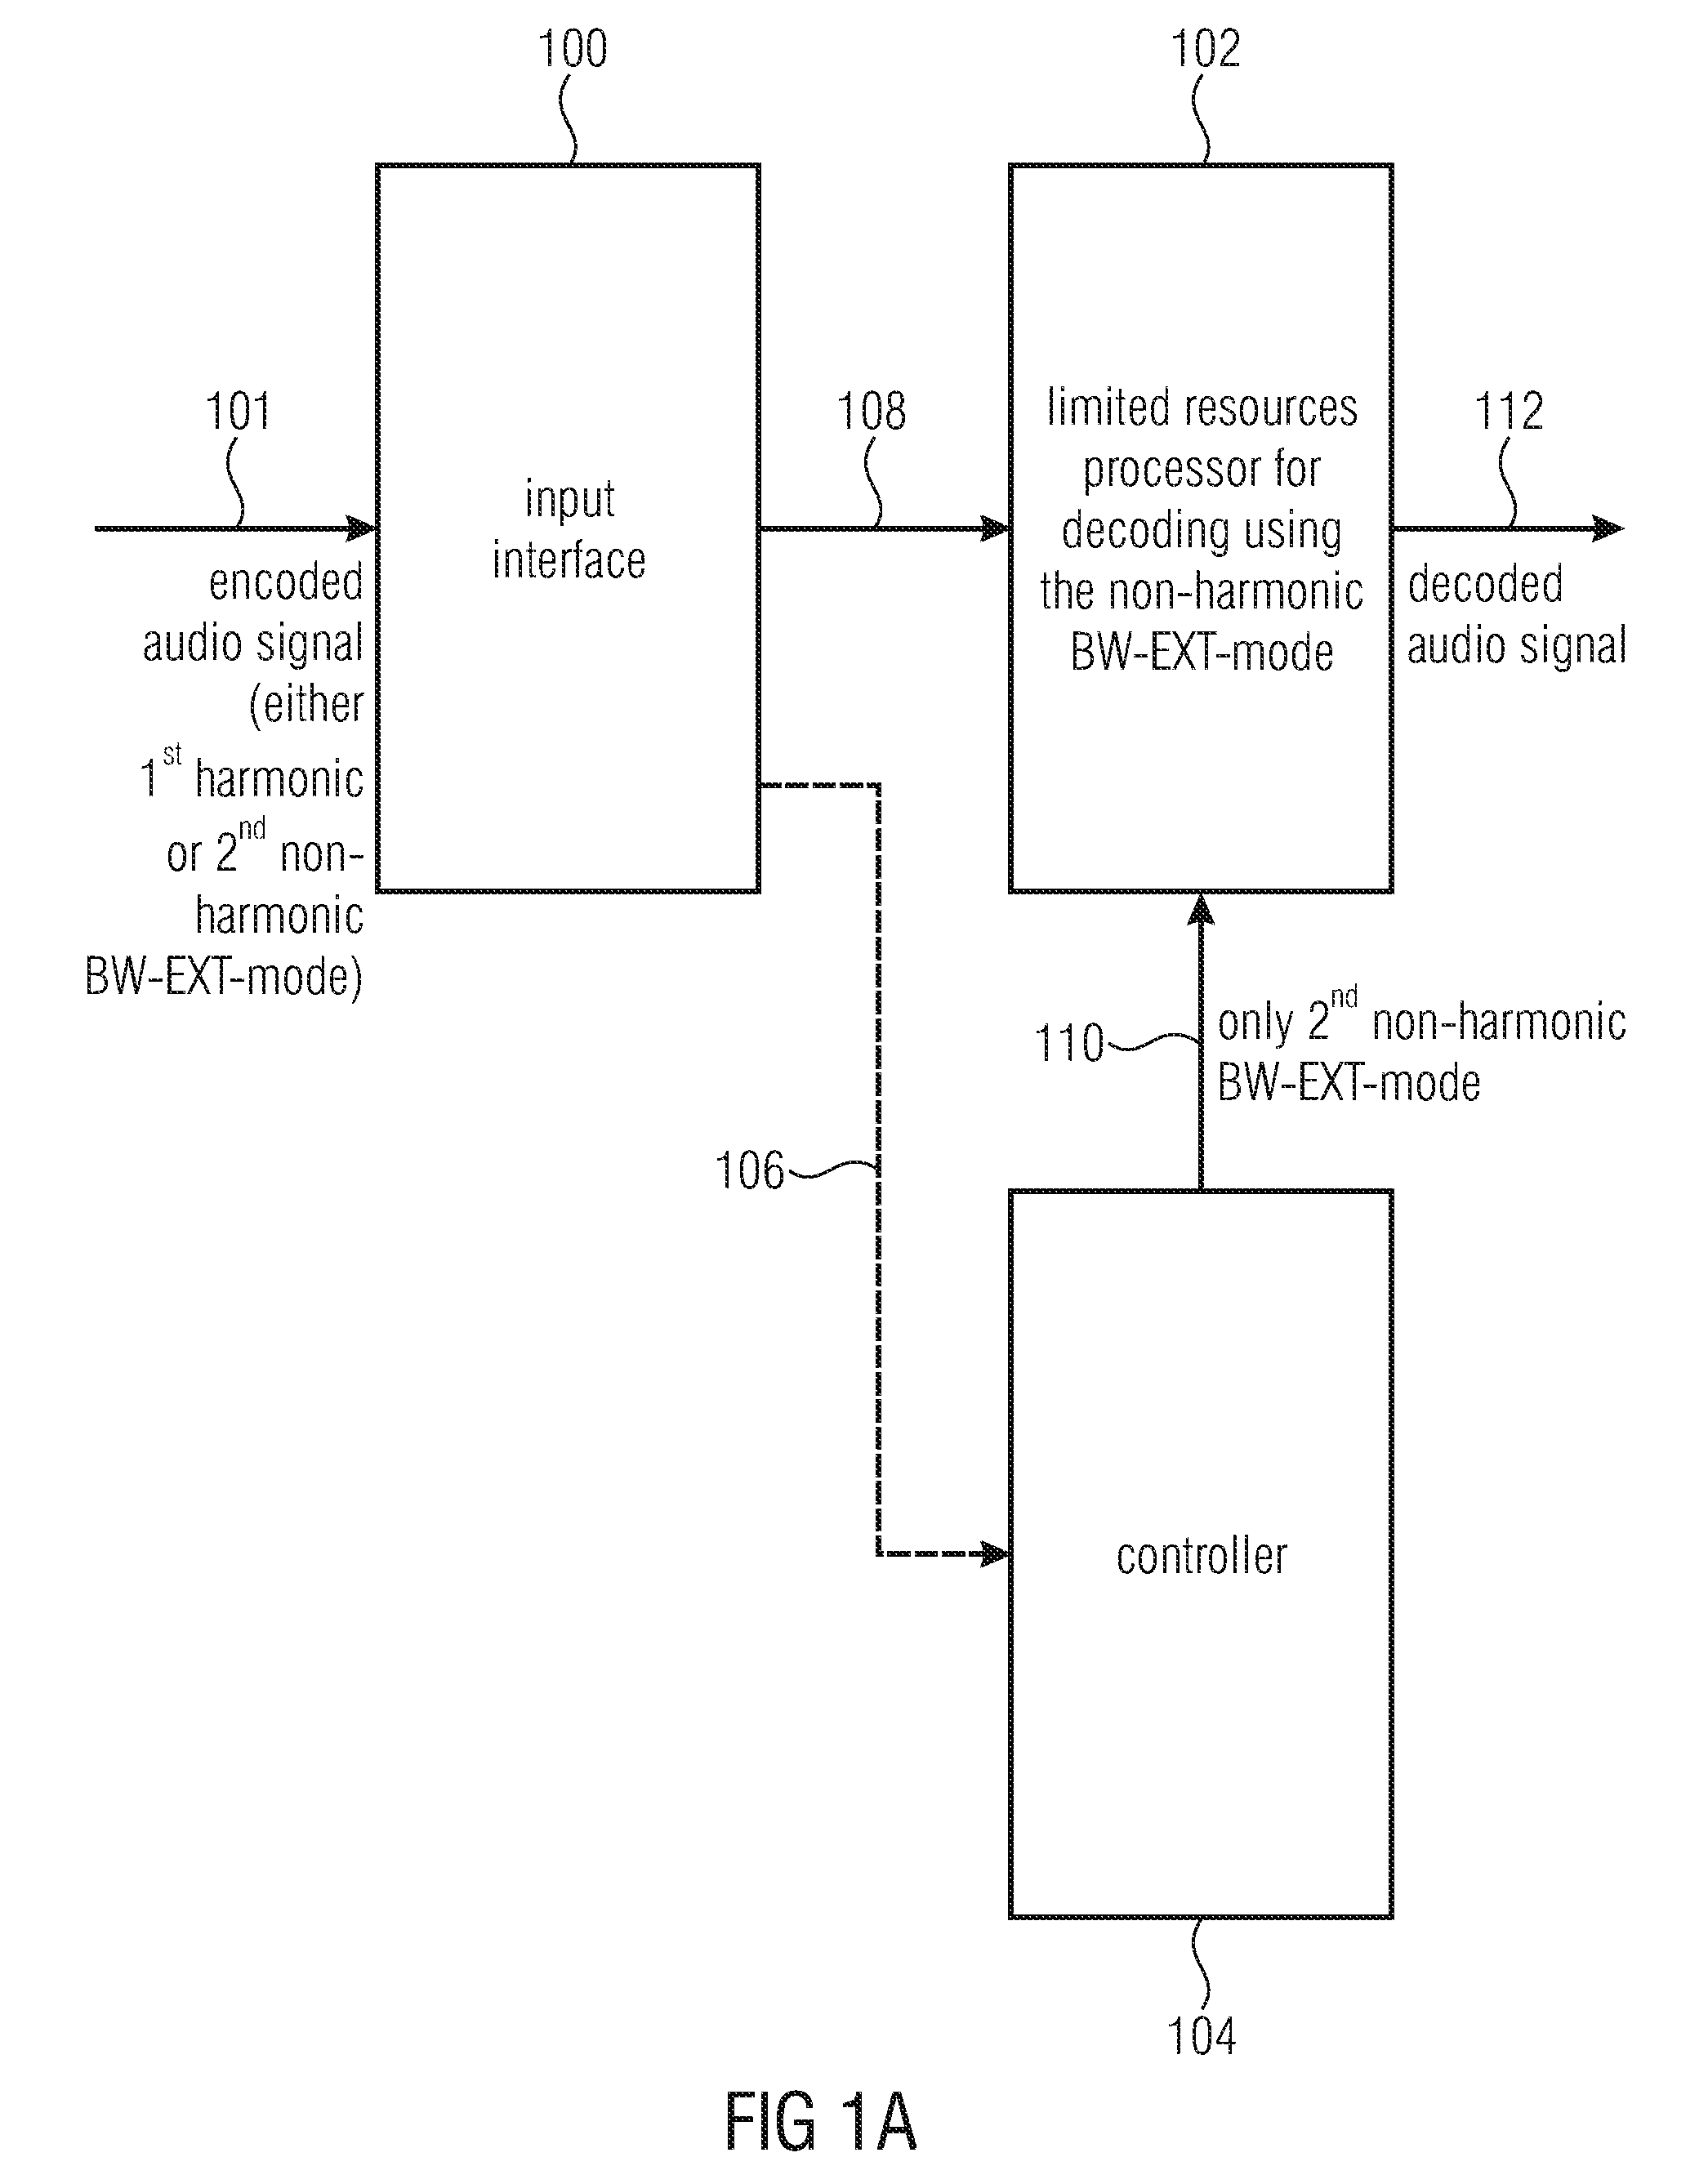 Apparatus and method for decoding an encoded audio signal with low computational resources